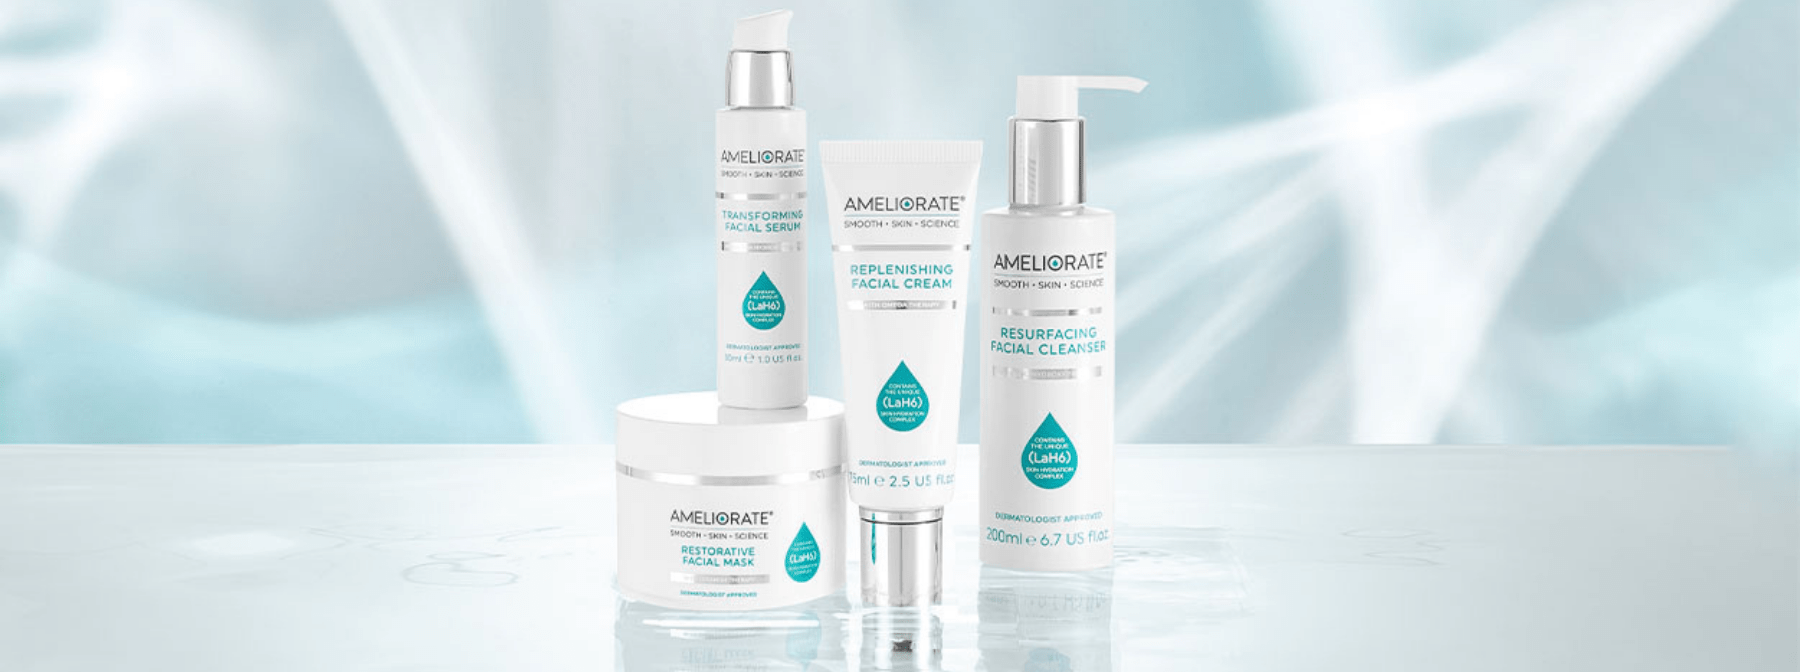 Facial Skincare Range: Everything You Need To Know